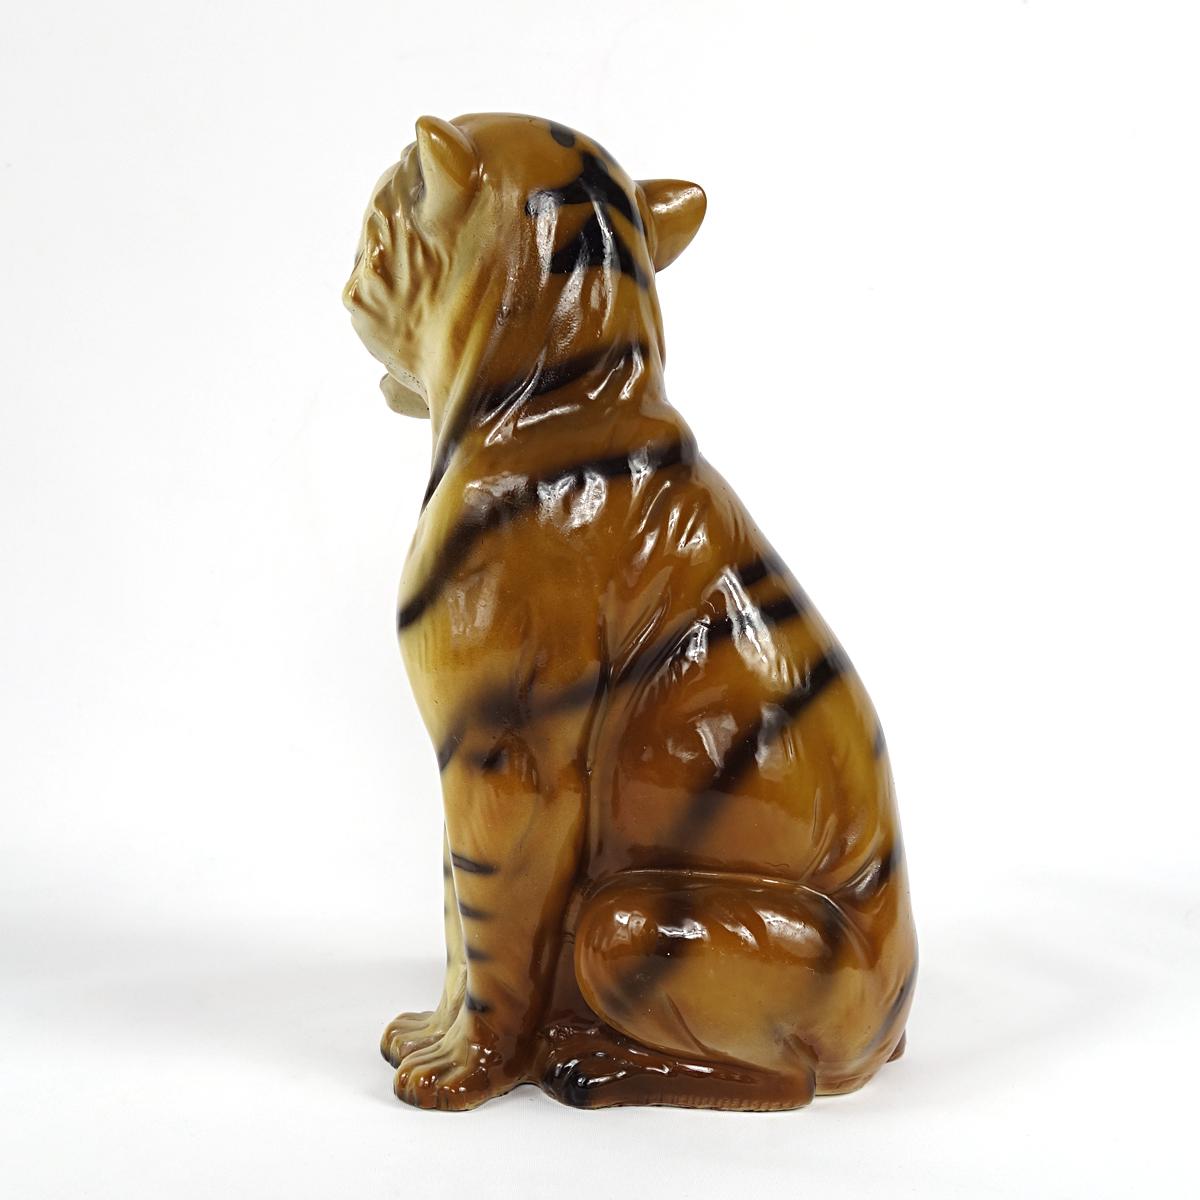 20th Century Mid-Century Modern Small Ceramic Tiger in the Style of Ronzan